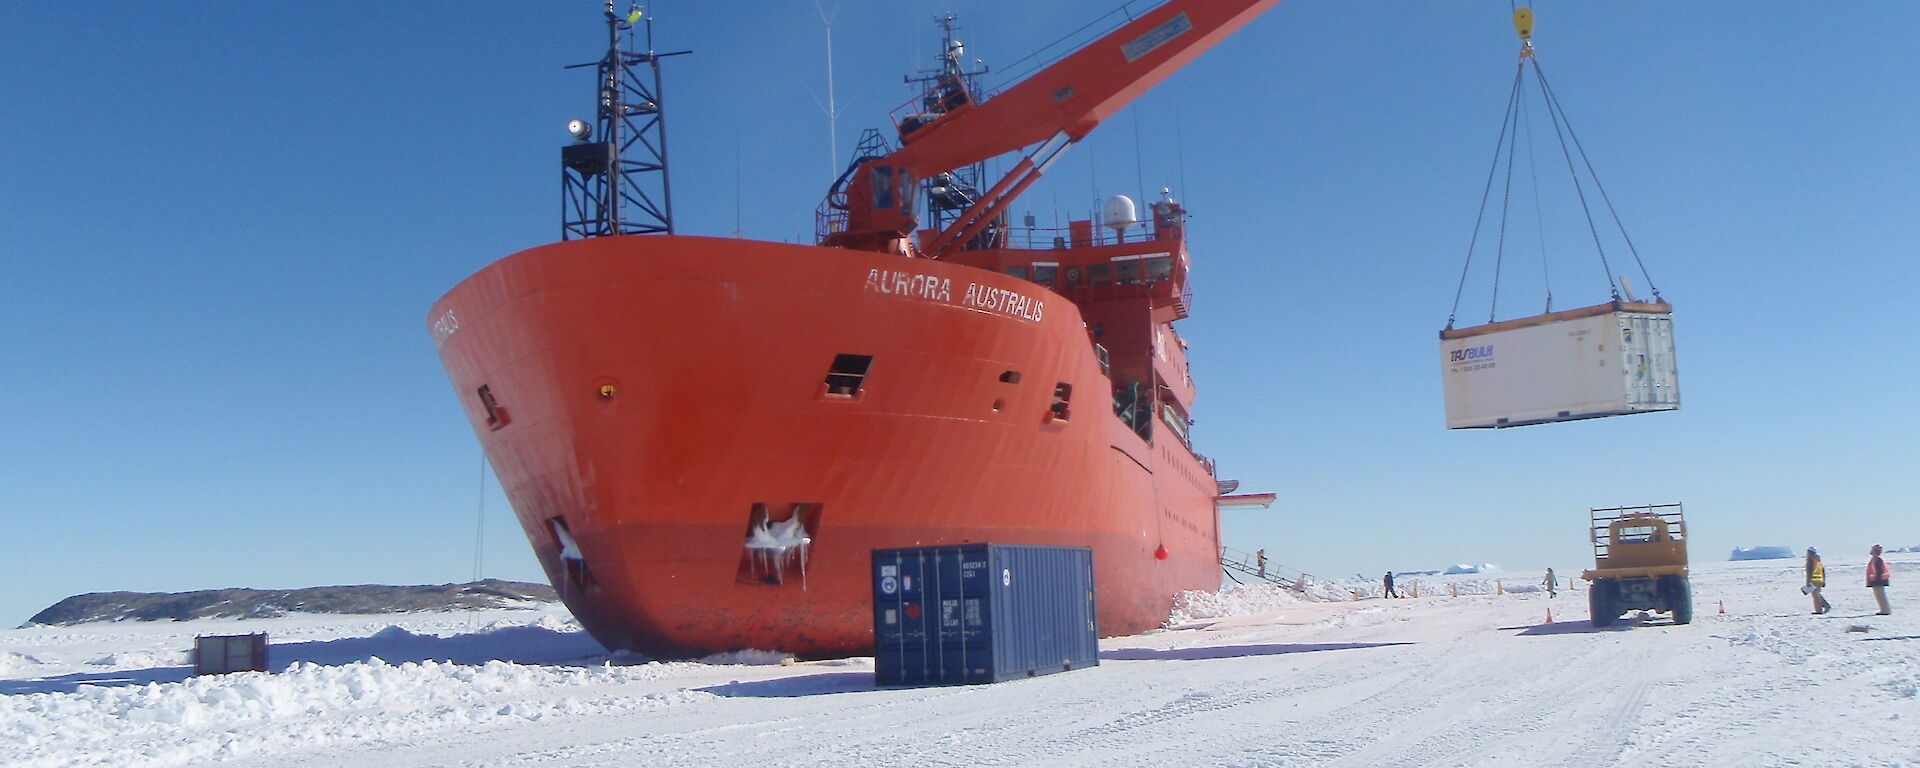 The ship Aurora Australis stuck in the thick ice during resupply